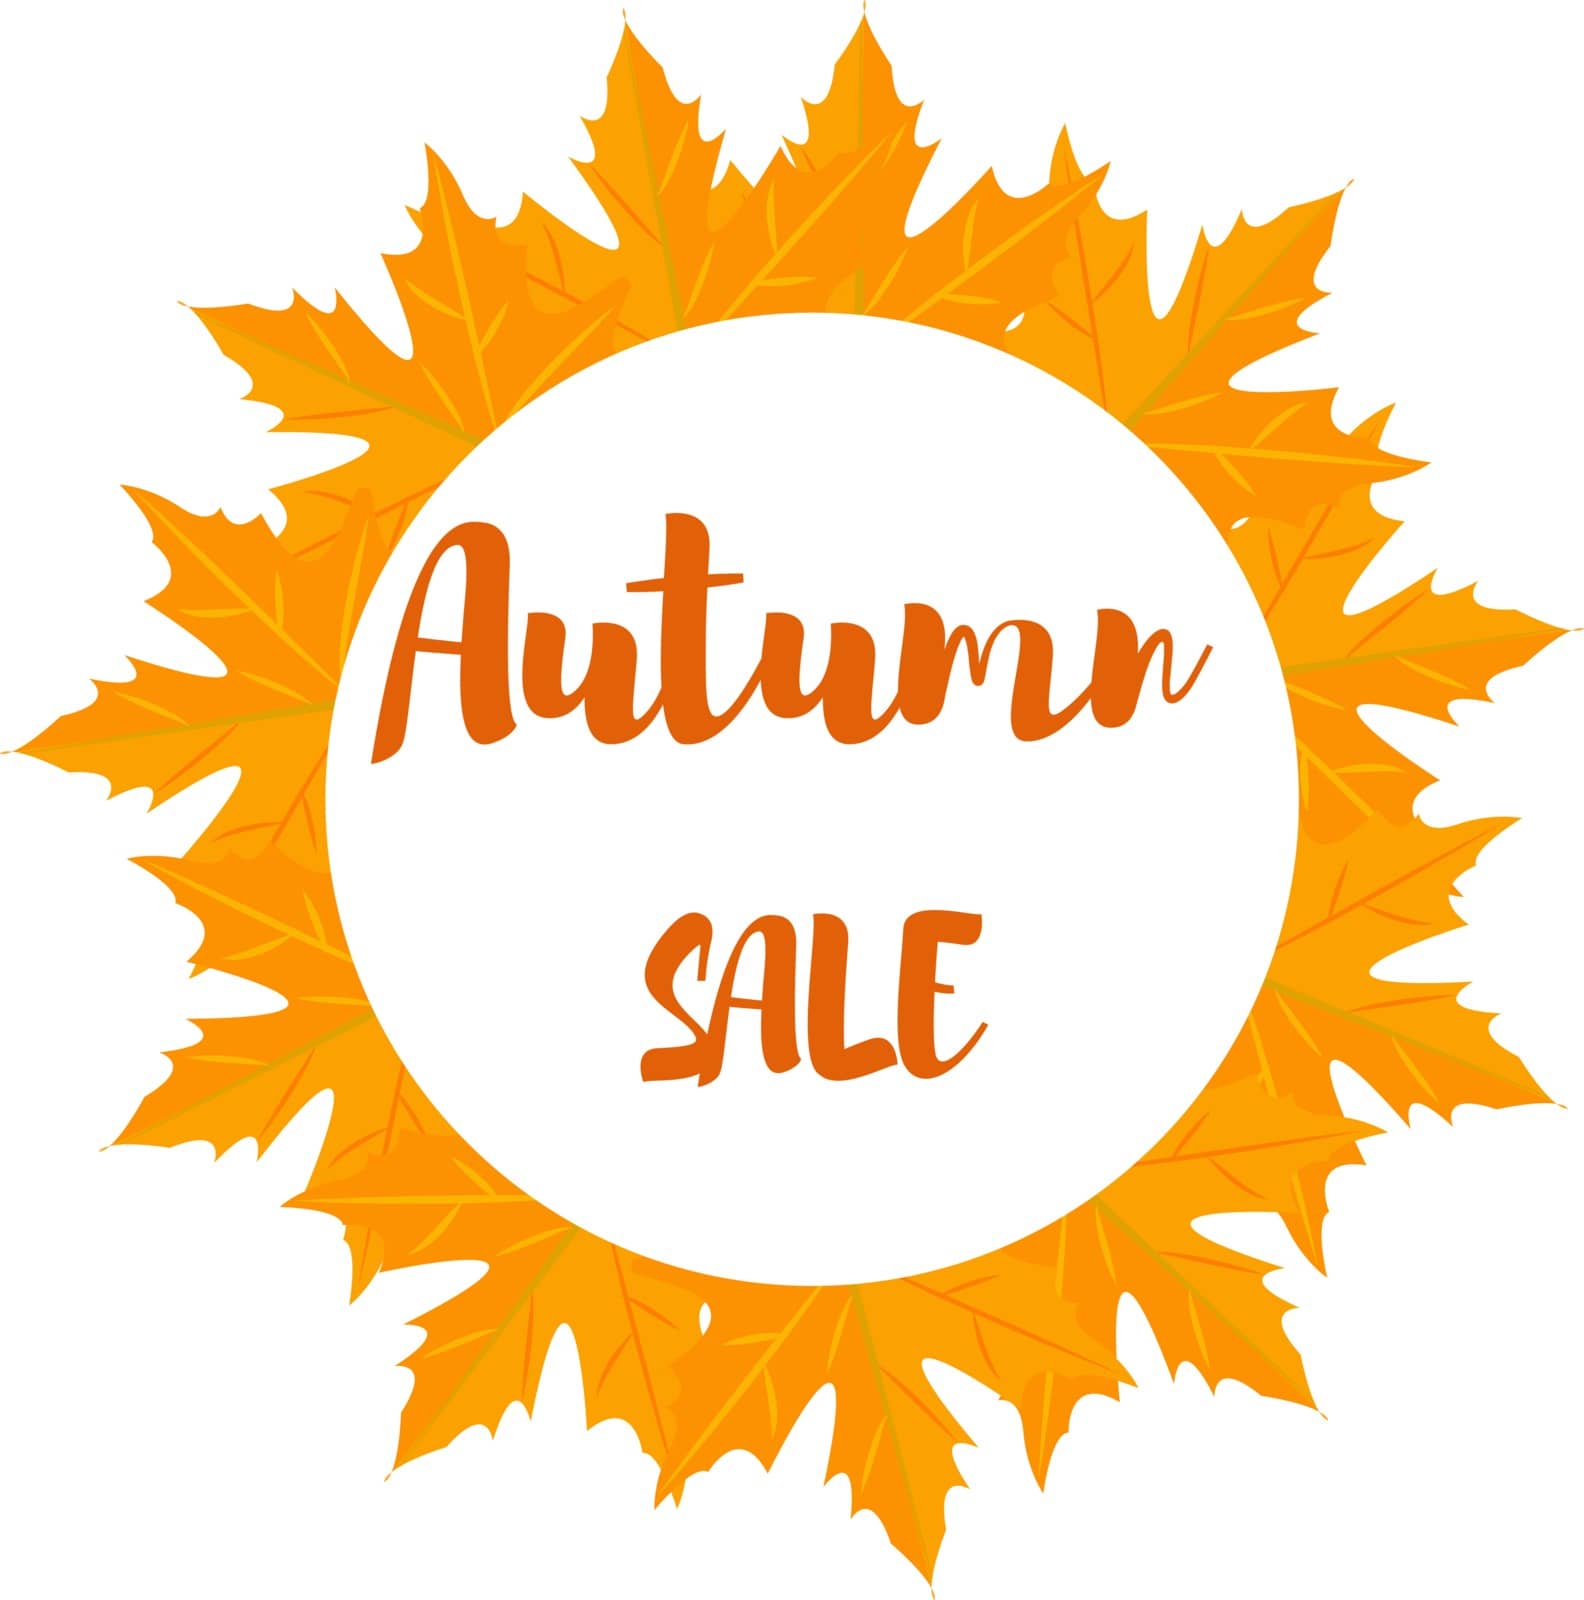 autumn foliage vector sale banner. autumn leaves in a circle